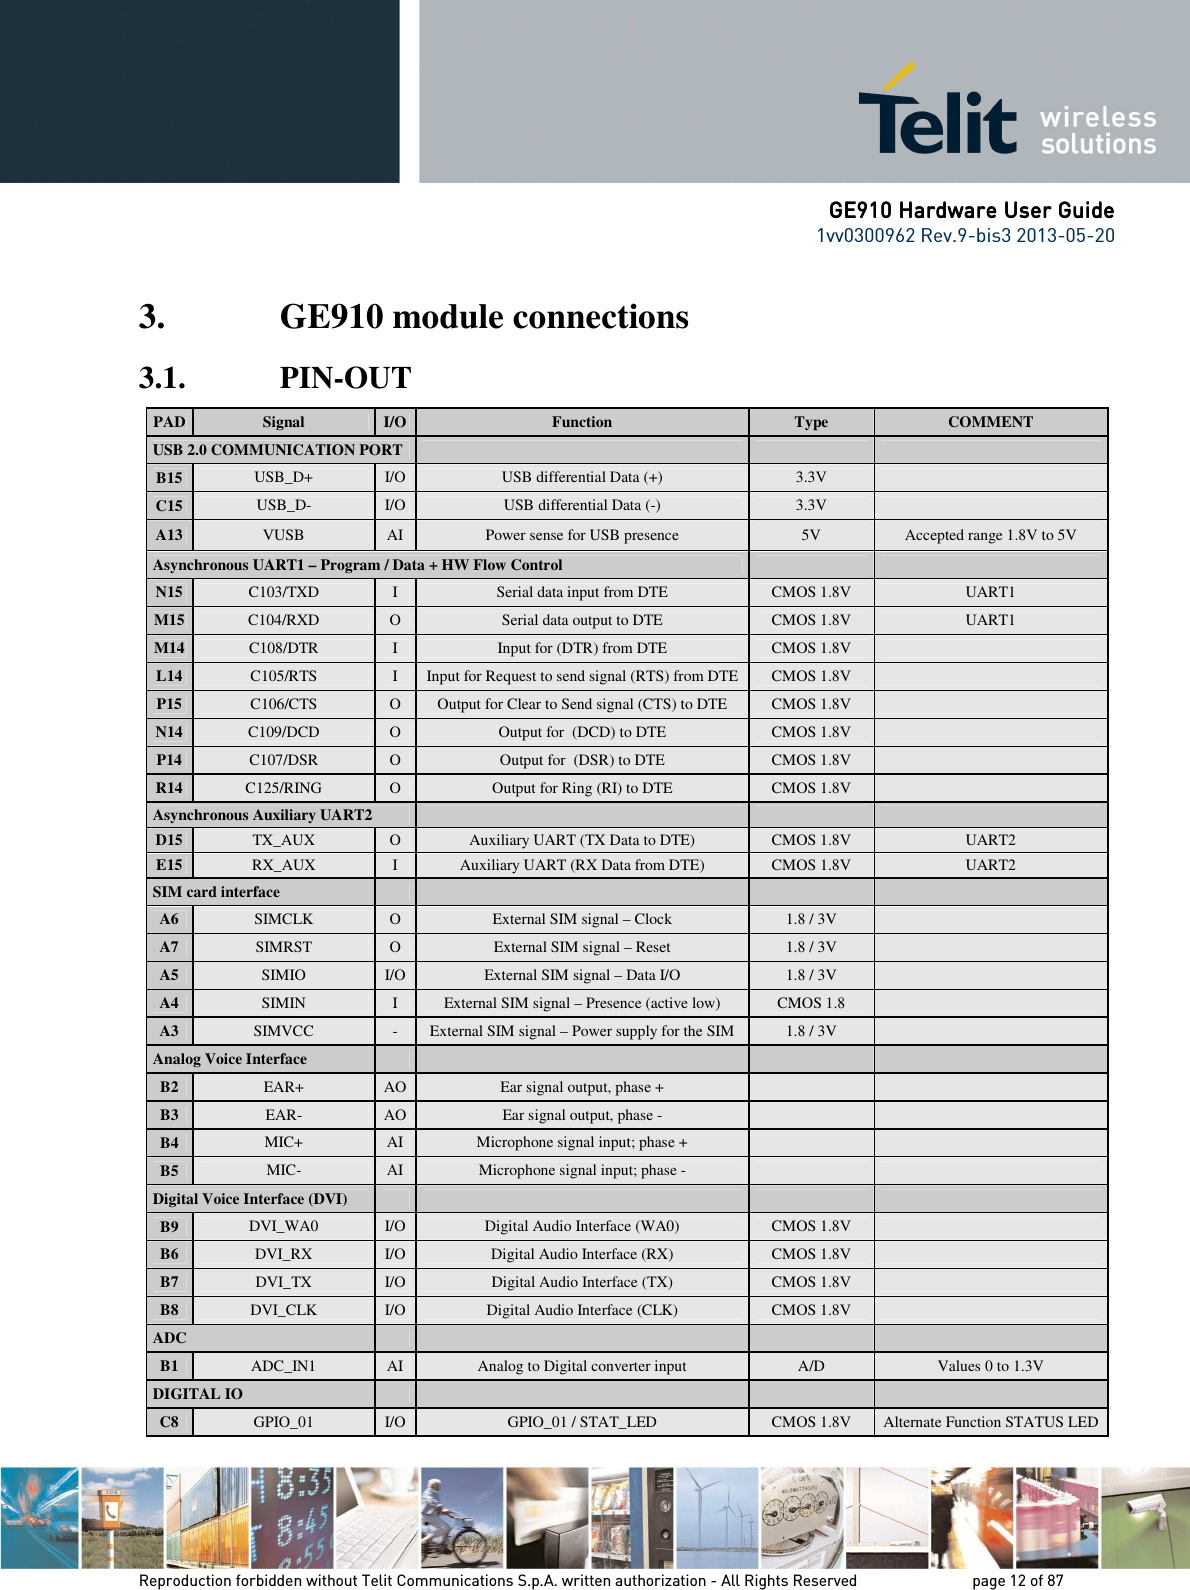      GE910 Hardware User GuideGE910 Hardware User GuideGE910 Hardware User GuideGE910 Hardware User Guide    1vv0300962 Rev.9-bis3 2013-05-20   Reproduction forbidden without Telit Communications S.p.A. written authorization - All Rights Reserved    page 12 of 87 Mod. 0805 2011-07 Rev.2 3. GE910 module connections  3.1. PIN-OUT PAD Signal  I/O  Function  Type  COMMENT USB 2.0 COMMUNICATION PORT       B15  USB_D+  I/O  USB differential Data (+)  3.3V   C15  USB_D-  I/O  USB differential Data (-)  3.3V   A13  VUSB  AI  Power sense for USB presence  5V  Accepted range 1.8V to 5V Asynchronous UART1 – Program / Data + HW Flow Control     N15  C103/TXD  I  Serial data input from DTE  CMOS 1.8V  UART1 M15 C104/RXD  O  Serial data output to DTE  CMOS 1.8V  UART1 M14 C108/DTR  I  Input for (DTR) from DTE  CMOS 1.8V   L14  C105/RTS  I  Input for Request to send signal (RTS) from DTE  CMOS 1.8V   P15  C106/CTS  O  Output for Clear to Send signal (CTS) to DTE CMOS 1.8V   N14  C109/DCD  O  Output for  (DCD) to DTE  CMOS 1.8V   P14  C107/DSR  O  Output for  (DSR) to DTE  CMOS 1.8V   R14  C125/RING  O  Output for Ring (RI) to DTE  CMOS 1.8V   Asynchronous Auxiliary UART2       D15  TX_AUX  O  Auxiliary UART (TX Data to DTE)  CMOS 1.8V   UART2 E15  RX_AUX  I  Auxiliary UART (RX Data from DTE)  CMOS 1.8V  UART2 SIM card interface         A6  SIMCLK  O  External SIM signal – Clock  1.8 / 3V   A7  SIMRST  O  External SIM signal – Reset  1.8 / 3V   A5  SIMIO  I/O  External SIM signal – Data I/O  1.8 / 3V   A4  SIMIN  I  External SIM signal – Presence (active low)  CMOS 1.8   A3  SIMVCC  -  External SIM signal – Power supply for the SIM  1.8 / 3V   Analog Voice Interface         B2 EAR+  AO  Ear signal output, phase +     B3 EAR-  AO  Ear signal output, phase -     B4 MIC+  AI  Microphone signal input; phase +     B5 MIC-  AI  Microphone signal input; phase -     Digital Voice Interface (DVI)        B9  DVI_WA0  I/O  Digital Audio Interface (WA0)  CMOS 1.8V   B6  DVI_RX  I/O  Digital Audio Interface (RX)  CMOS 1.8V   B7  DVI_TX  I/O  Digital Audio Interface (TX)  CMOS 1.8V   B8  DVI_CLK  I/O  Digital Audio Interface (CLK)  CMOS 1.8V   ADC         B1  ADC_IN1  AI  Analog to Digital converter input  A/D  Values 0 to 1.3V DIGITAL IO         C8  GPIO_01  I/O  GPIO_01 / STAT_LED  CMOS 1.8V  Alternate Function STATUS LED 